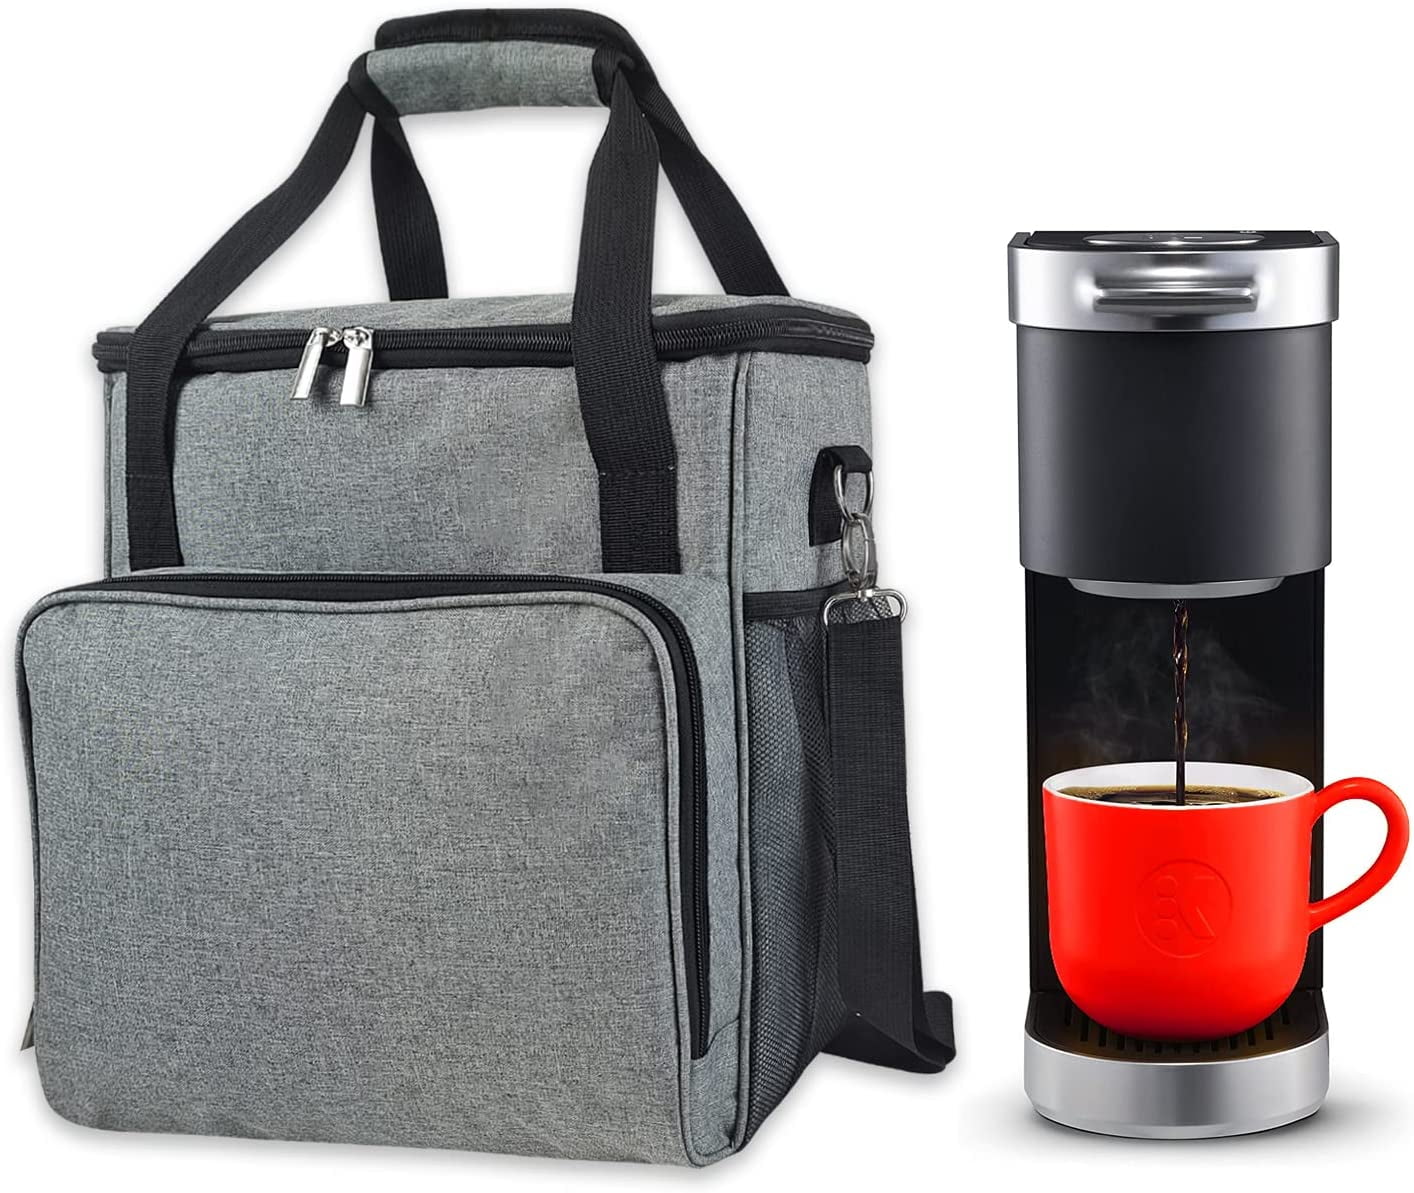 CURMIO Coffee Maker Travel Bag Compatible with Keurig K-Mini or K